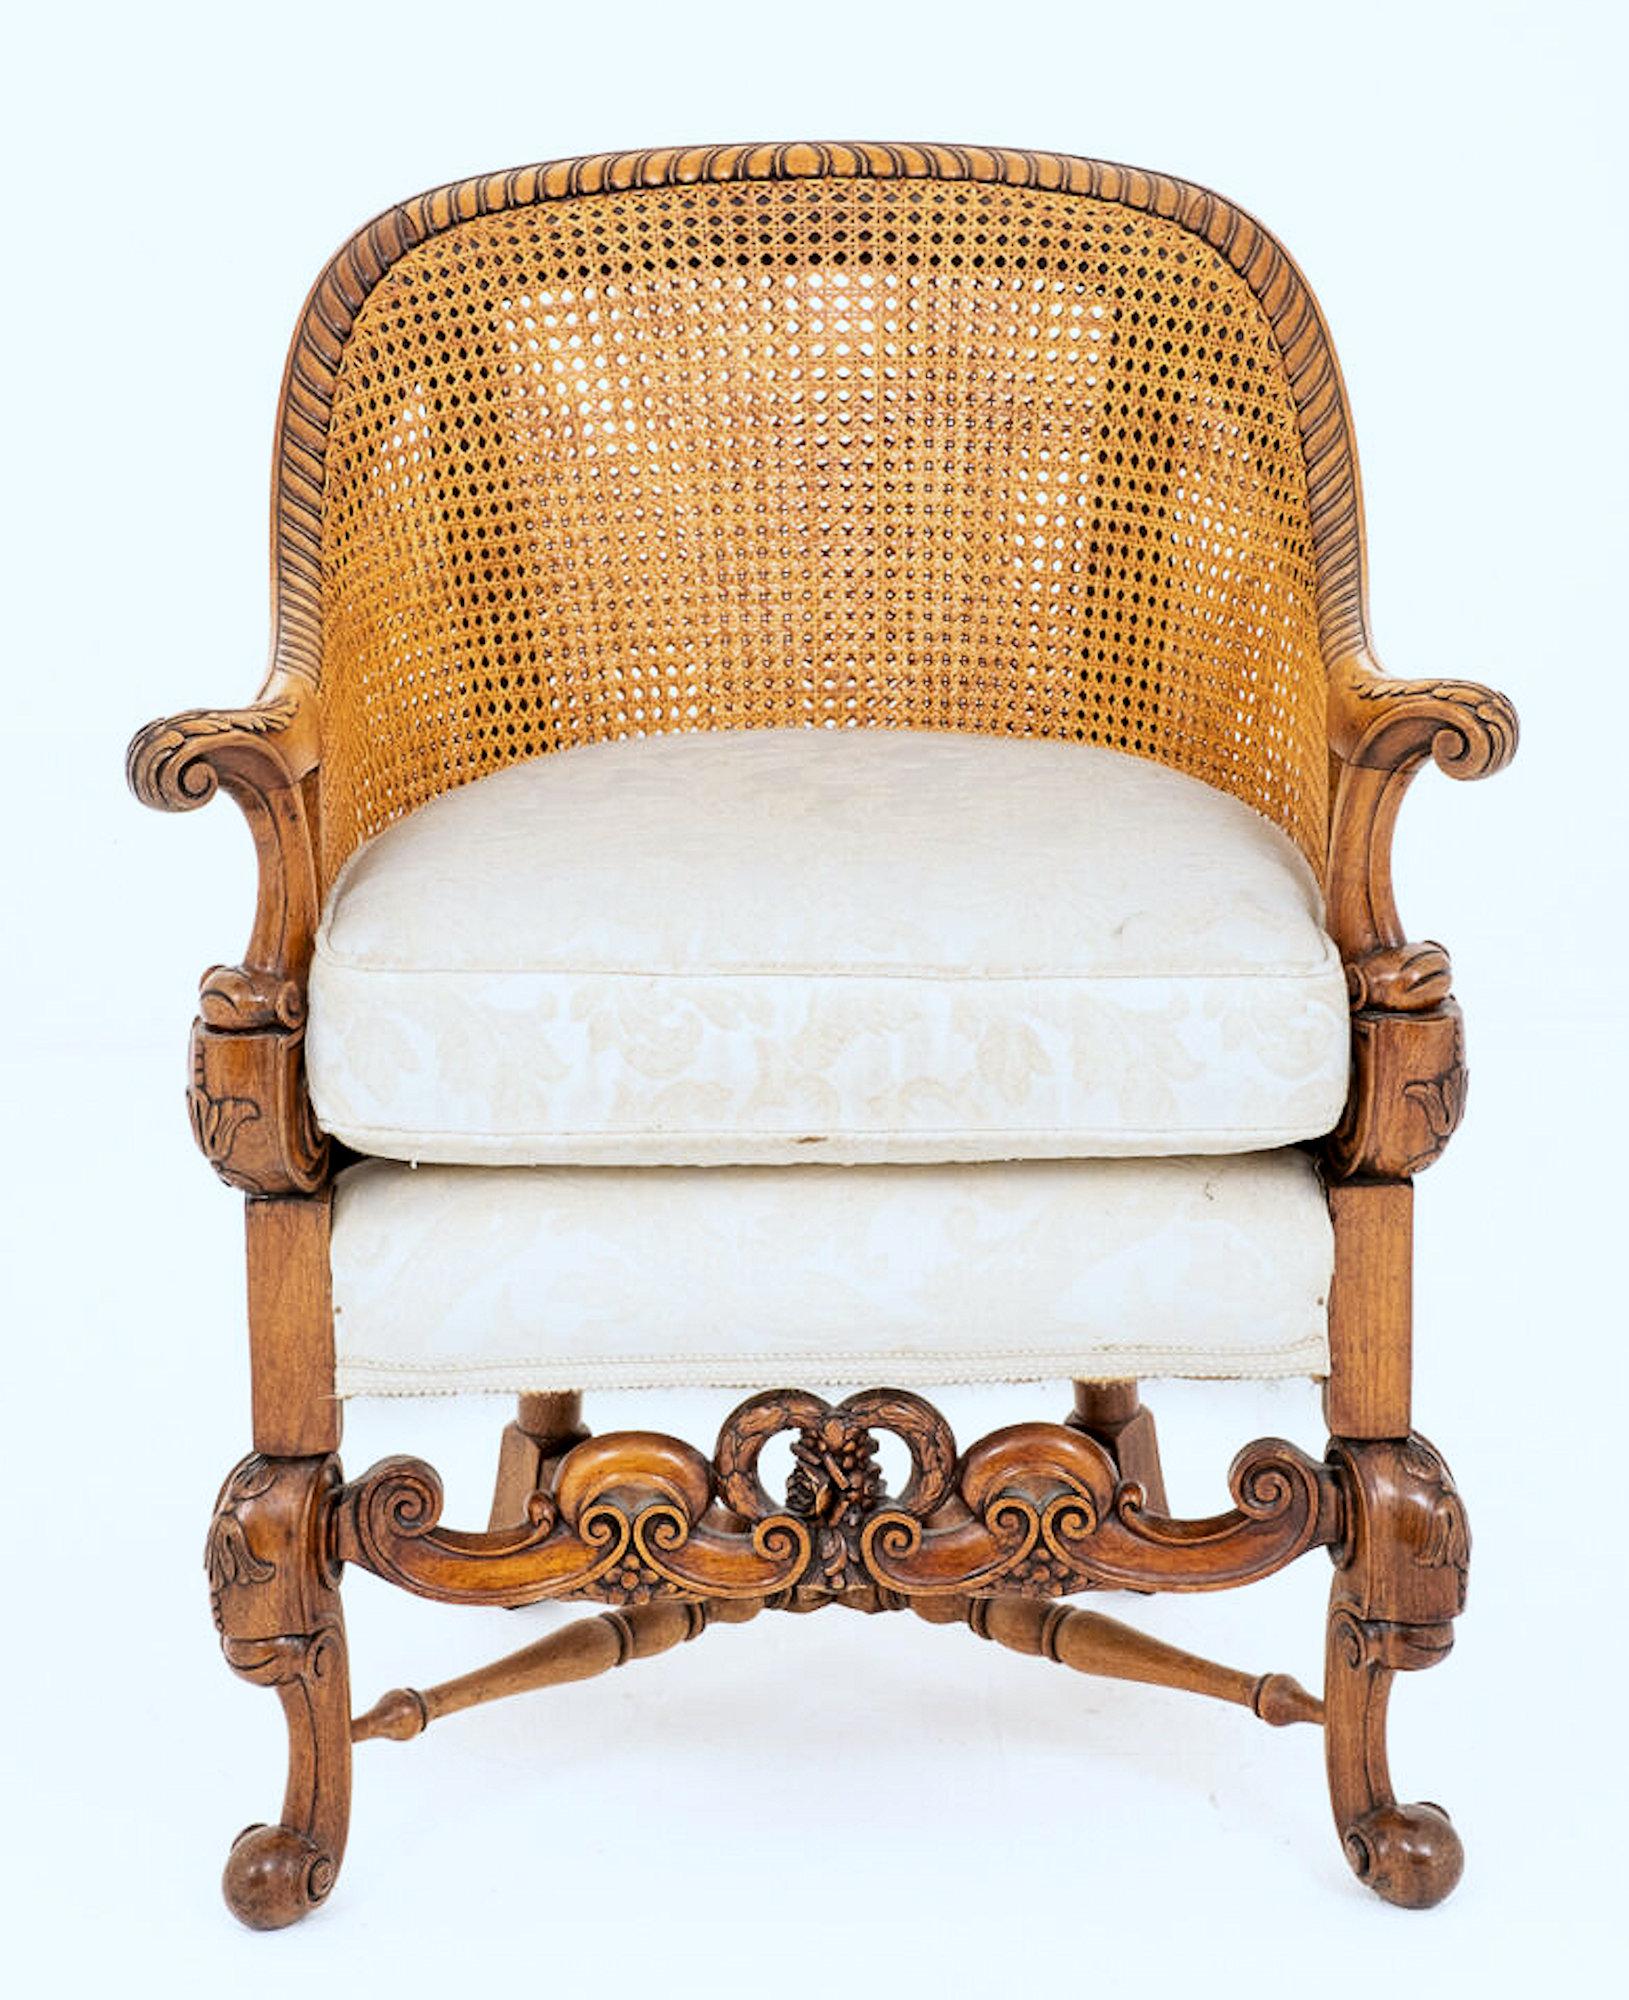 This beautiful and ornately designed 19th century mahogany bergère chair in the Carolean style features squat cabriole carved legs and an elaborated carved front stretcher bar. The arm supports are nicely carved with acanthus leaves and there is an